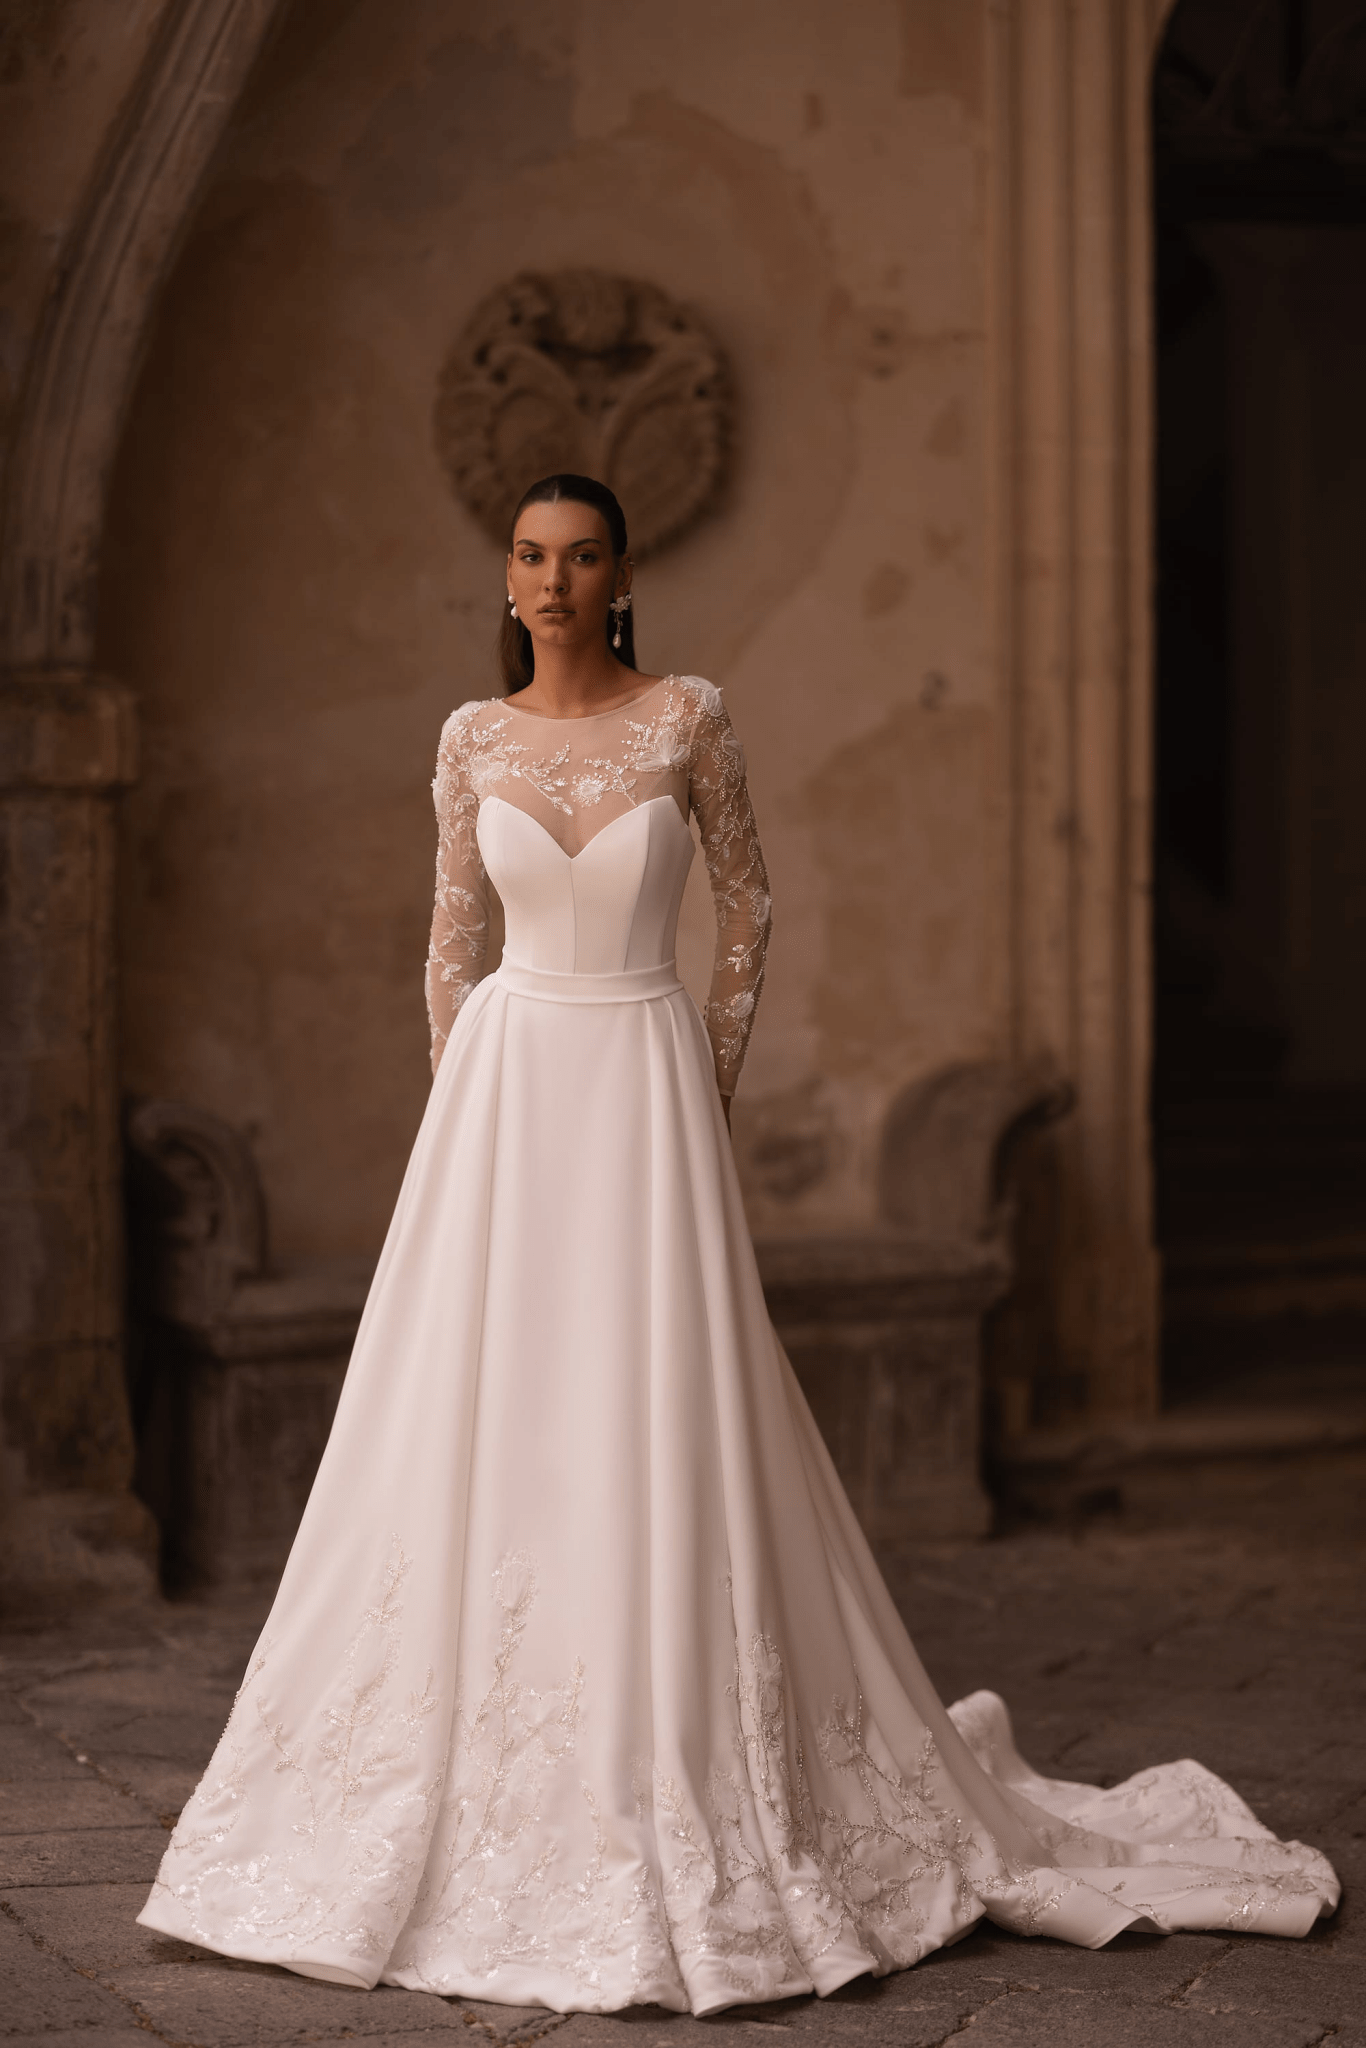 Exquisite A-Line Wedding Dress with Lace Sleeves - Embellished Wedding Gown Plus Size - WonderlandByLilian